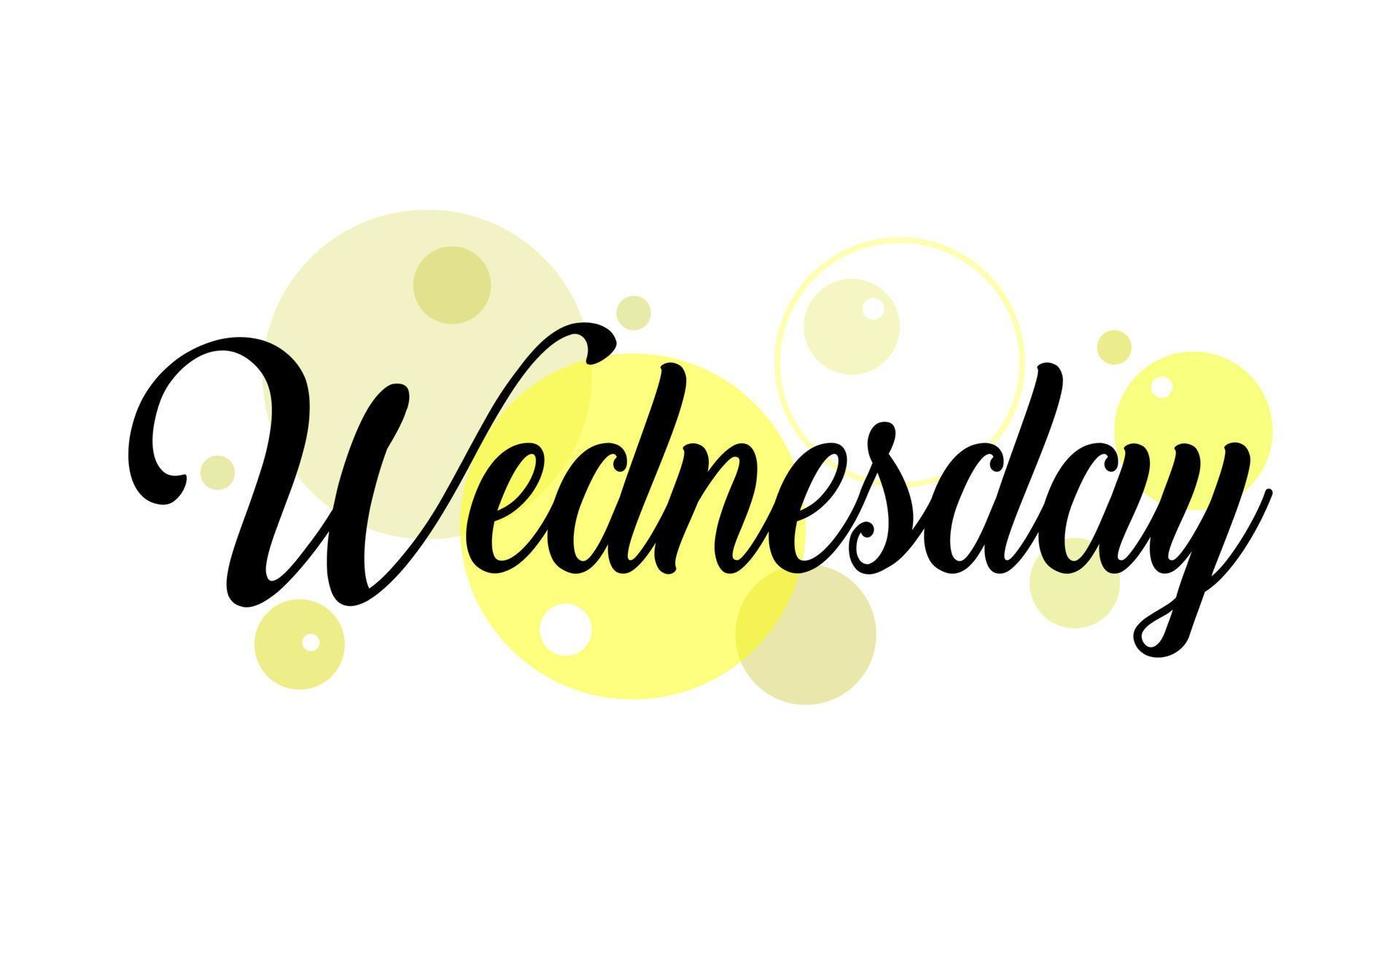 Wednesday writing text vector